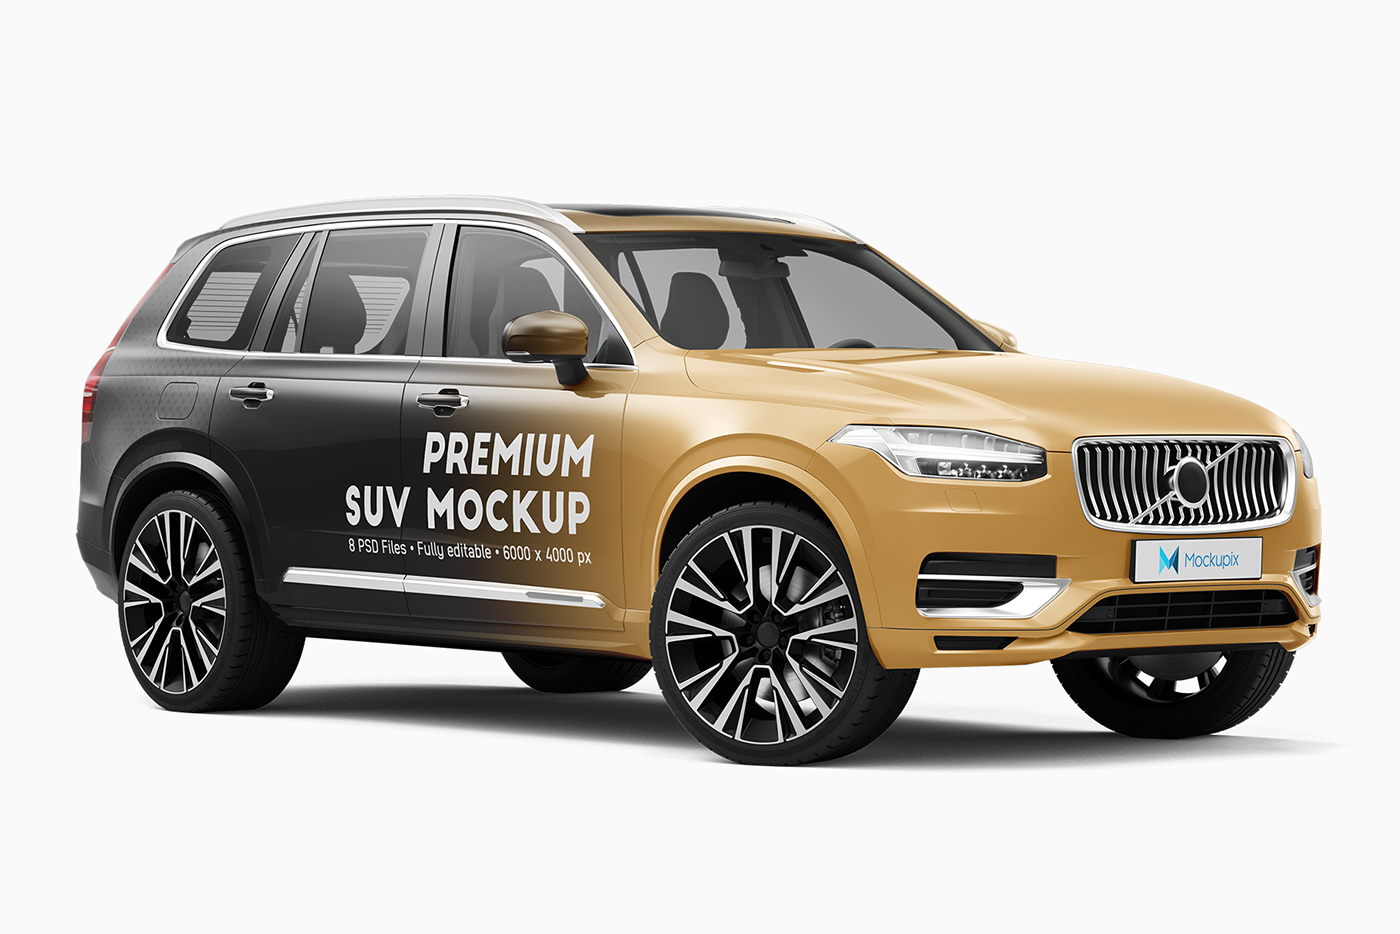 Volvo wrapping Mockup tuning decal foiling print graphic tools xc90